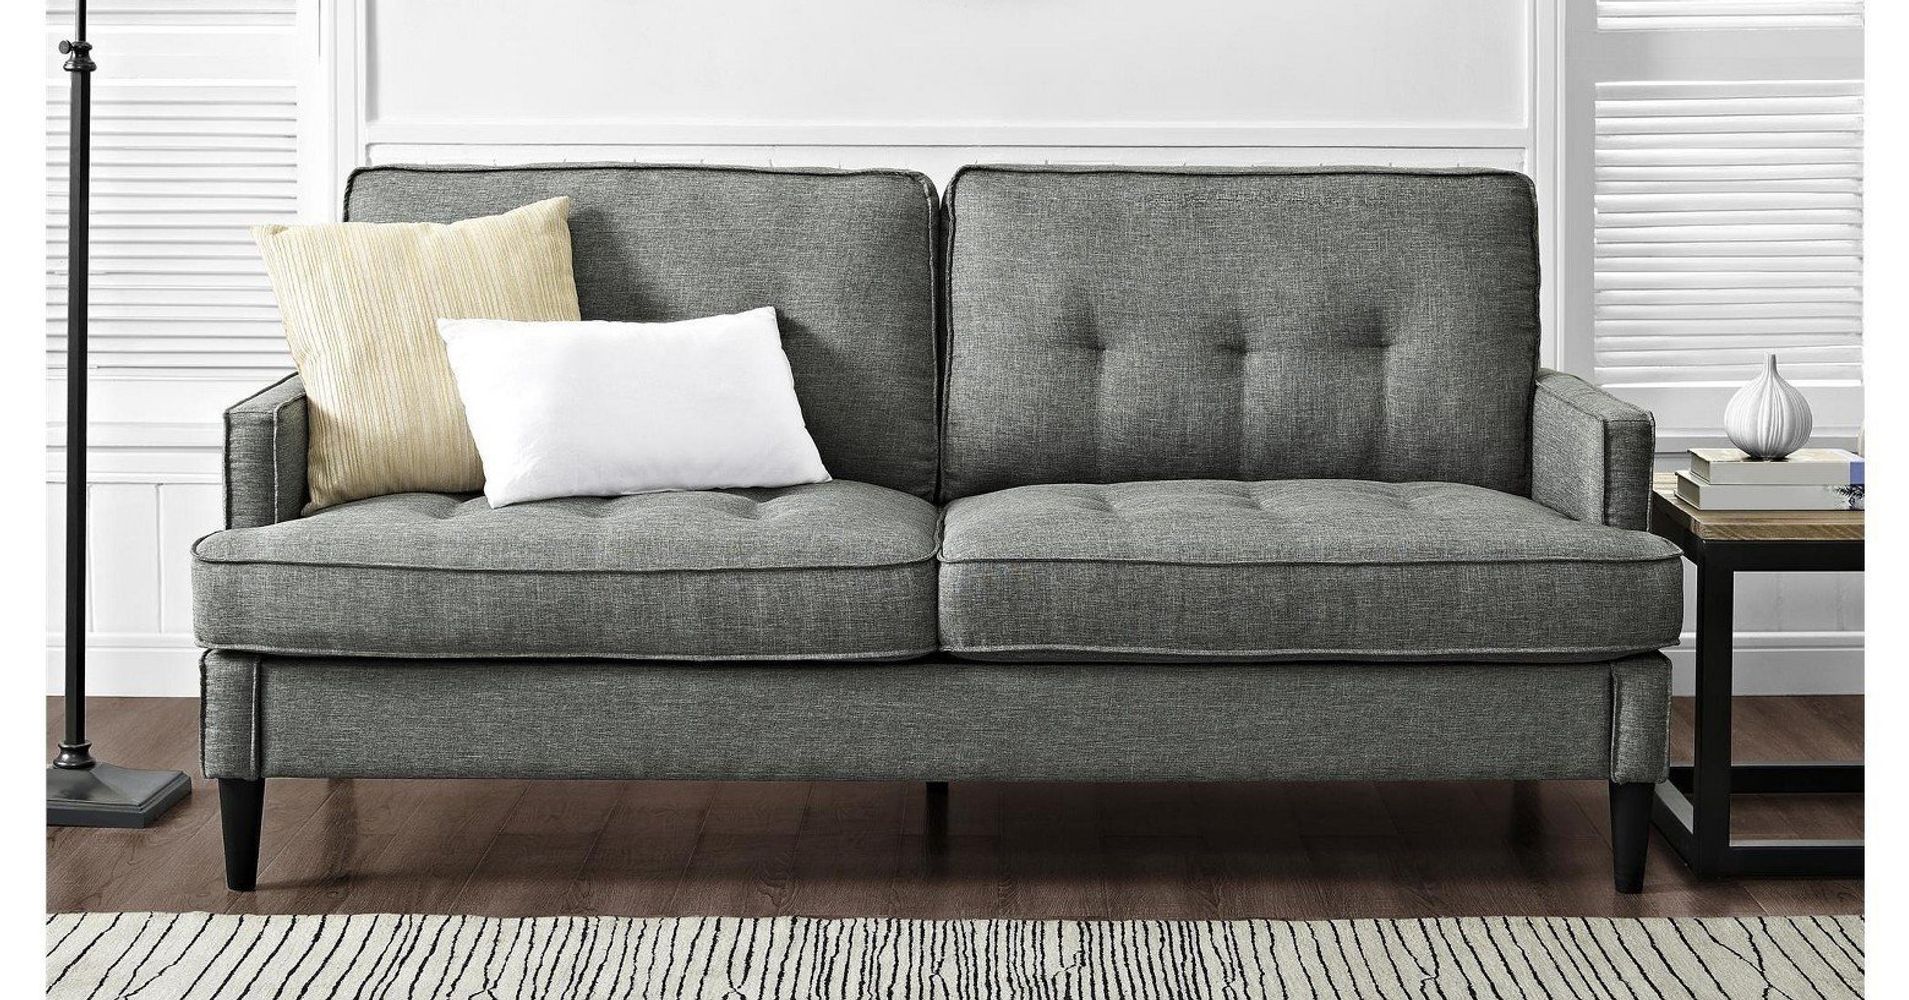 12 Couches For Small Spaces That Are Actually Roomy | HuffPost Life